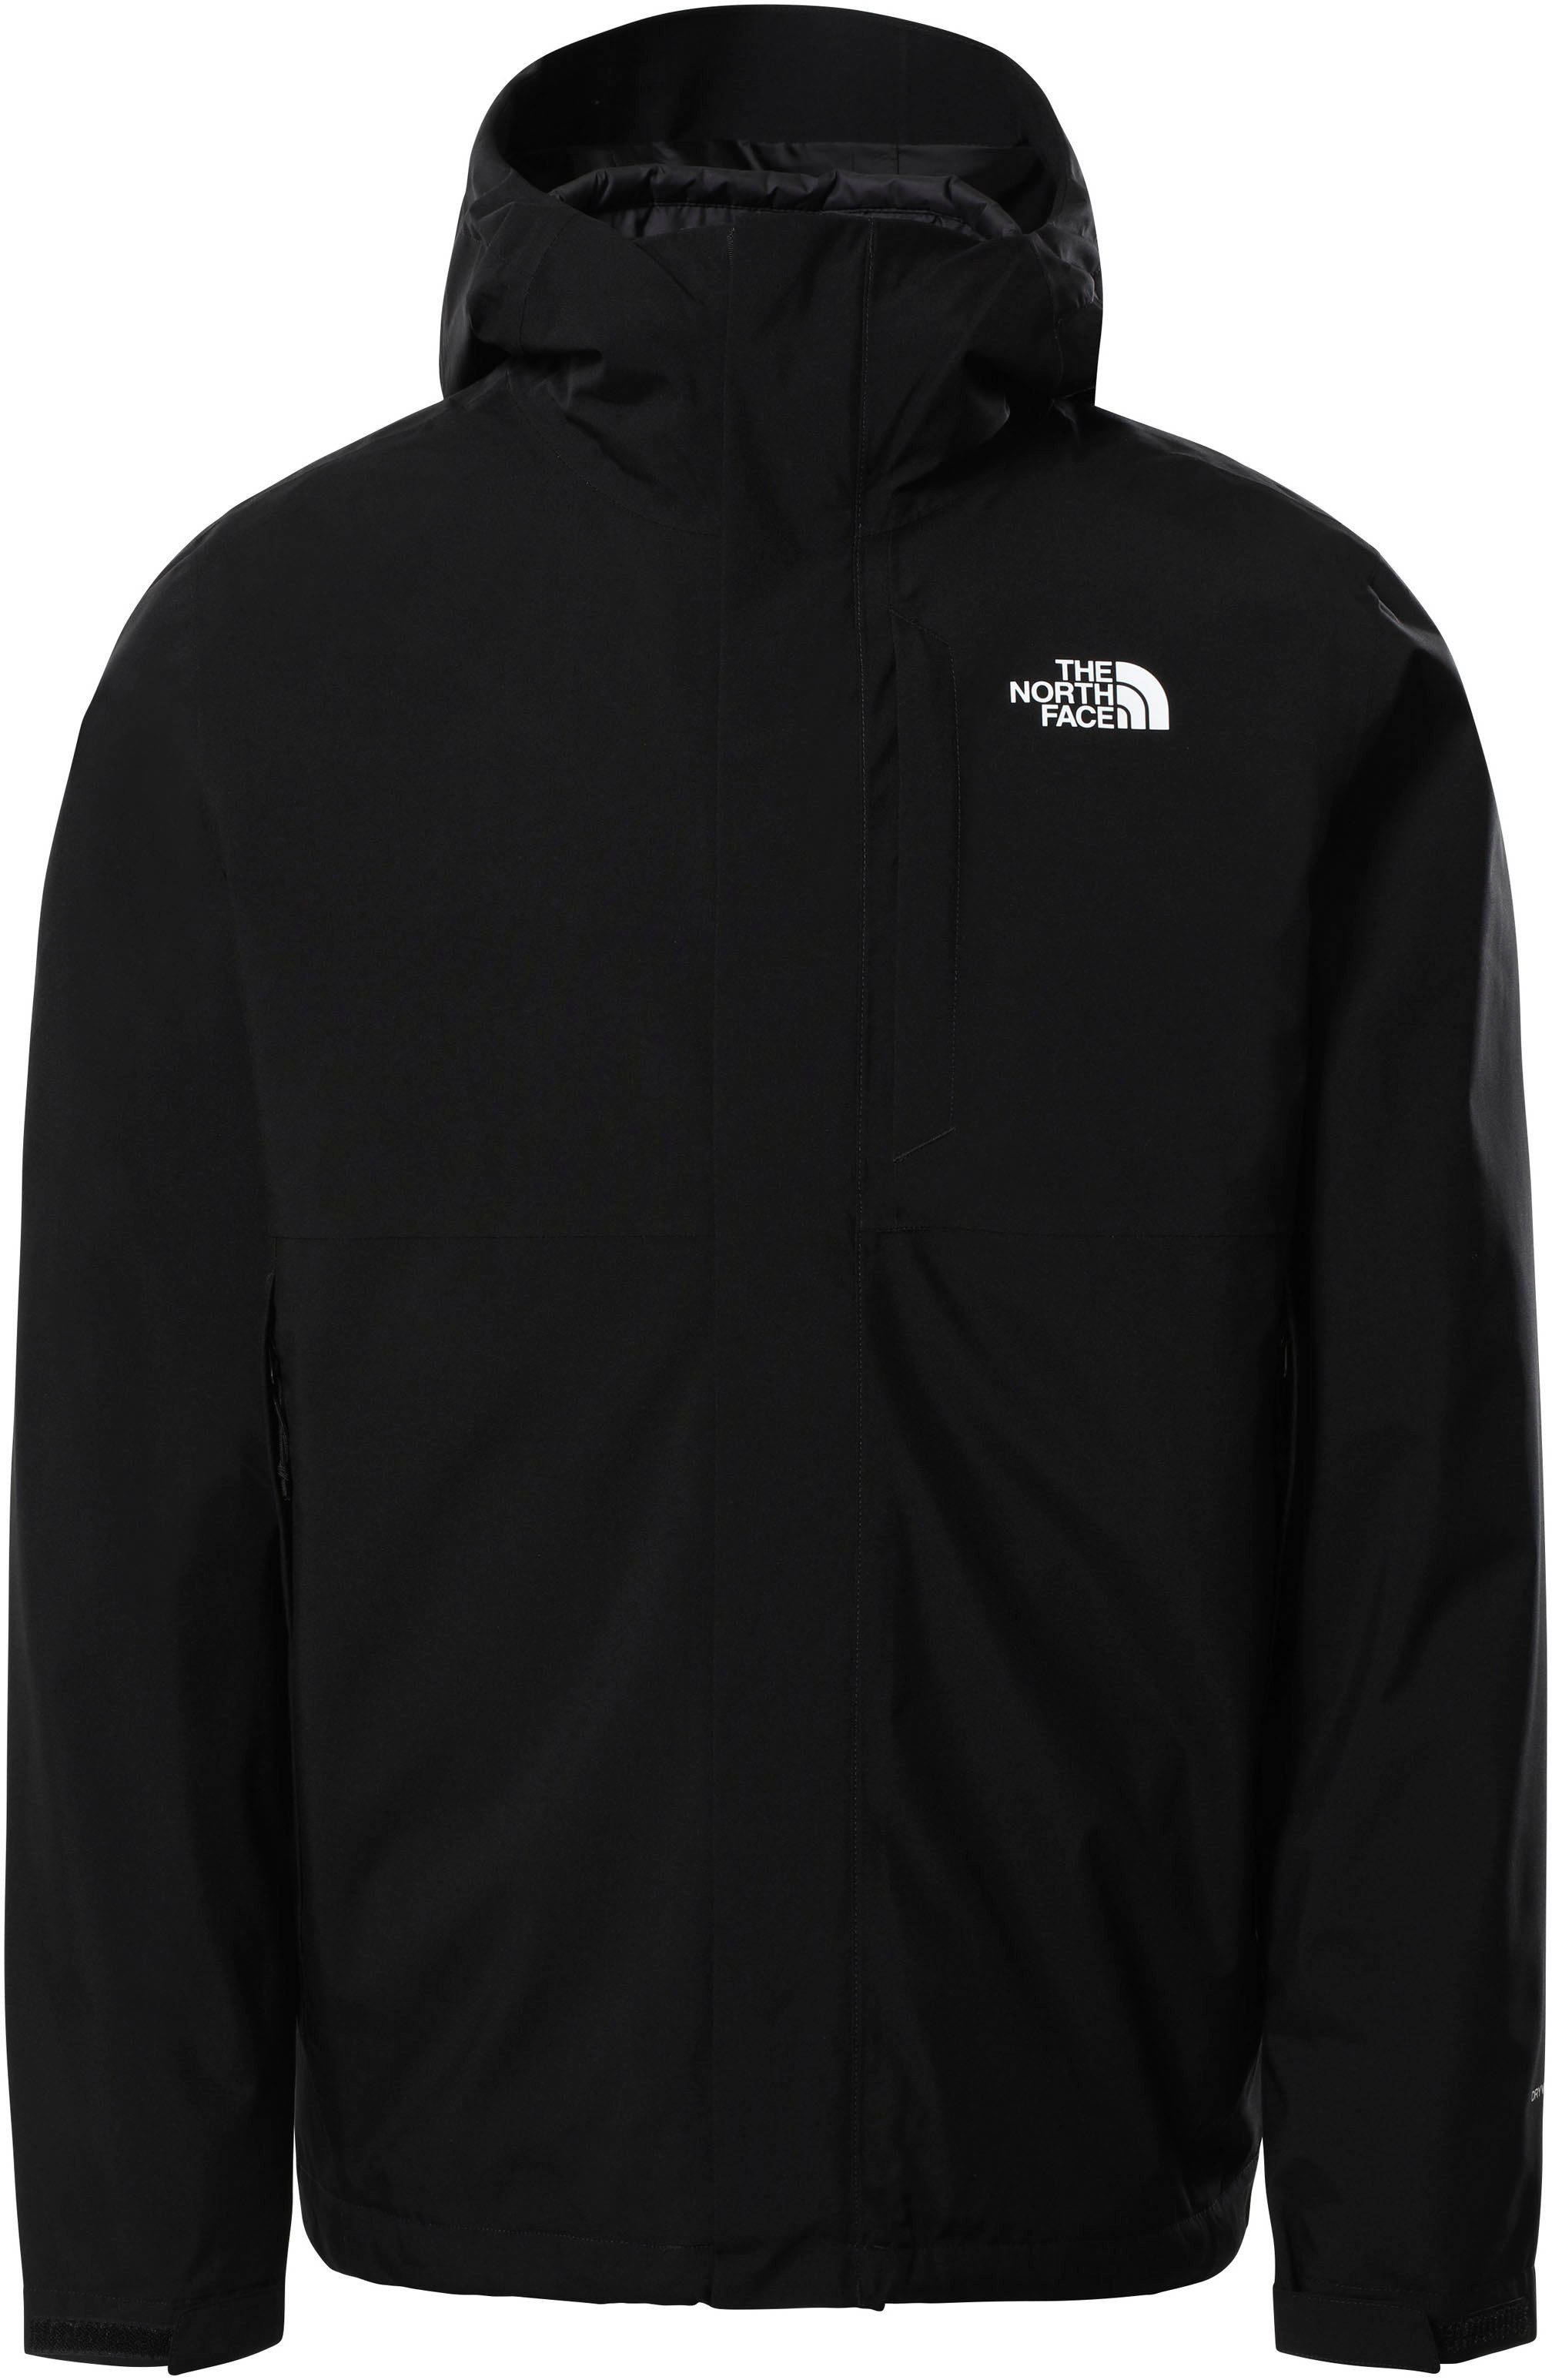 The North Face Outdoorjacke (2-St) mit abnehmbarer Innenjacke